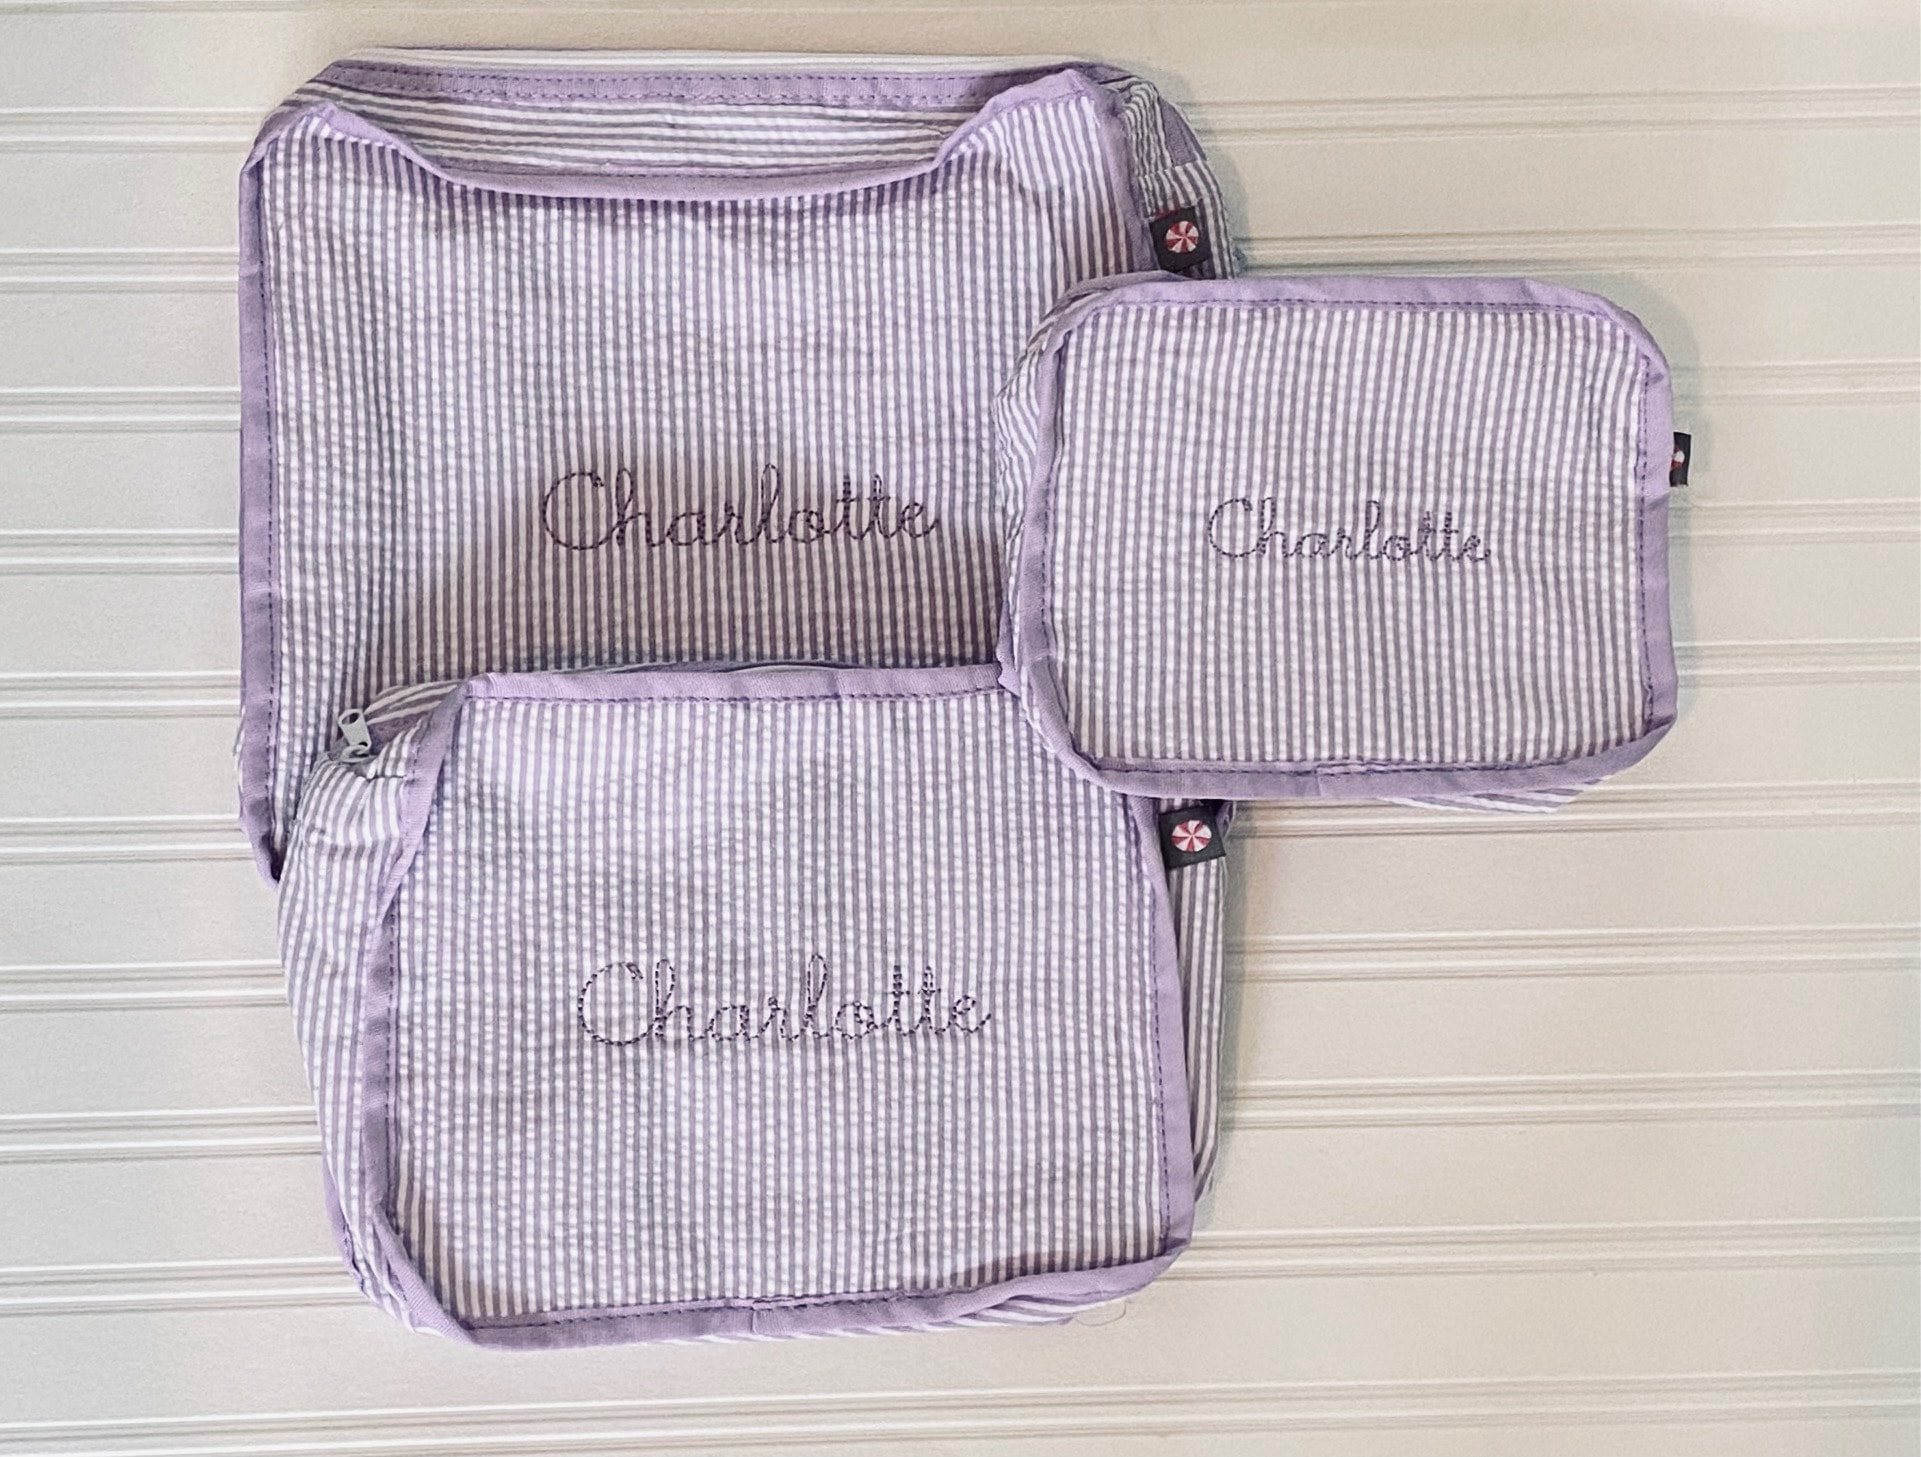 6-Bag Monogrammed Packing Bags for Travel